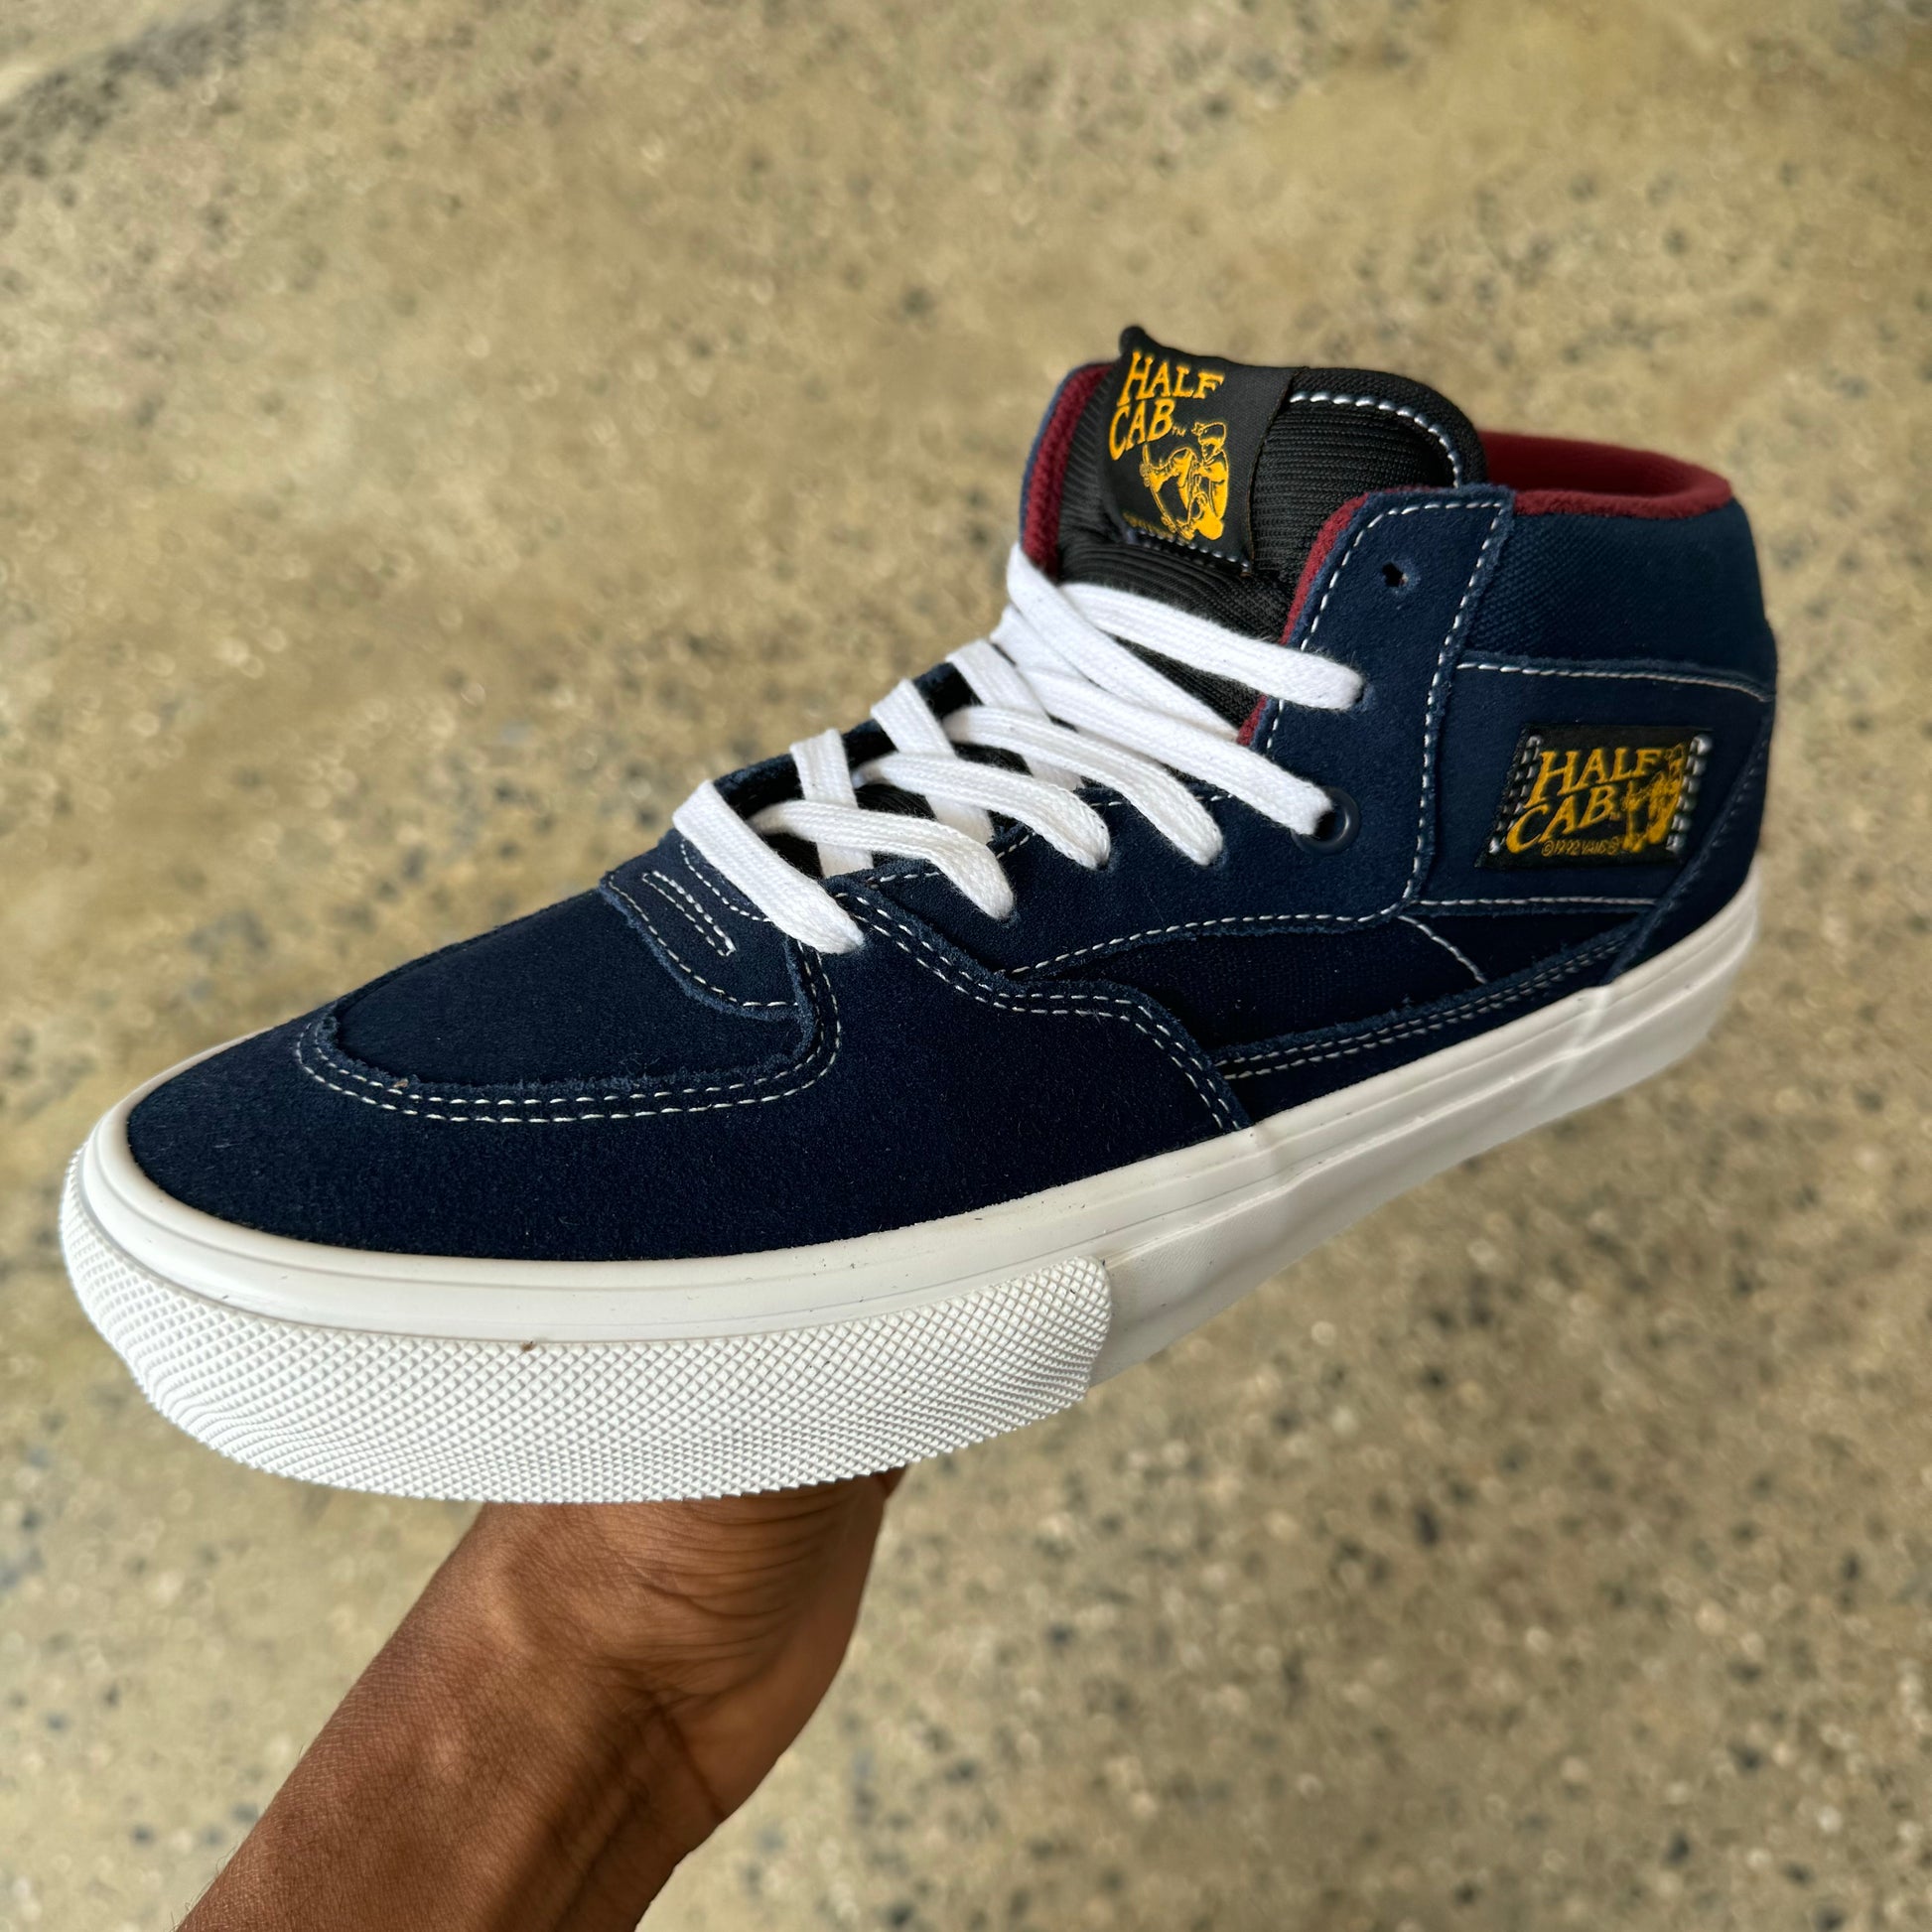 navy blue shoe with white stitching and burgundy inside with white rubber sole